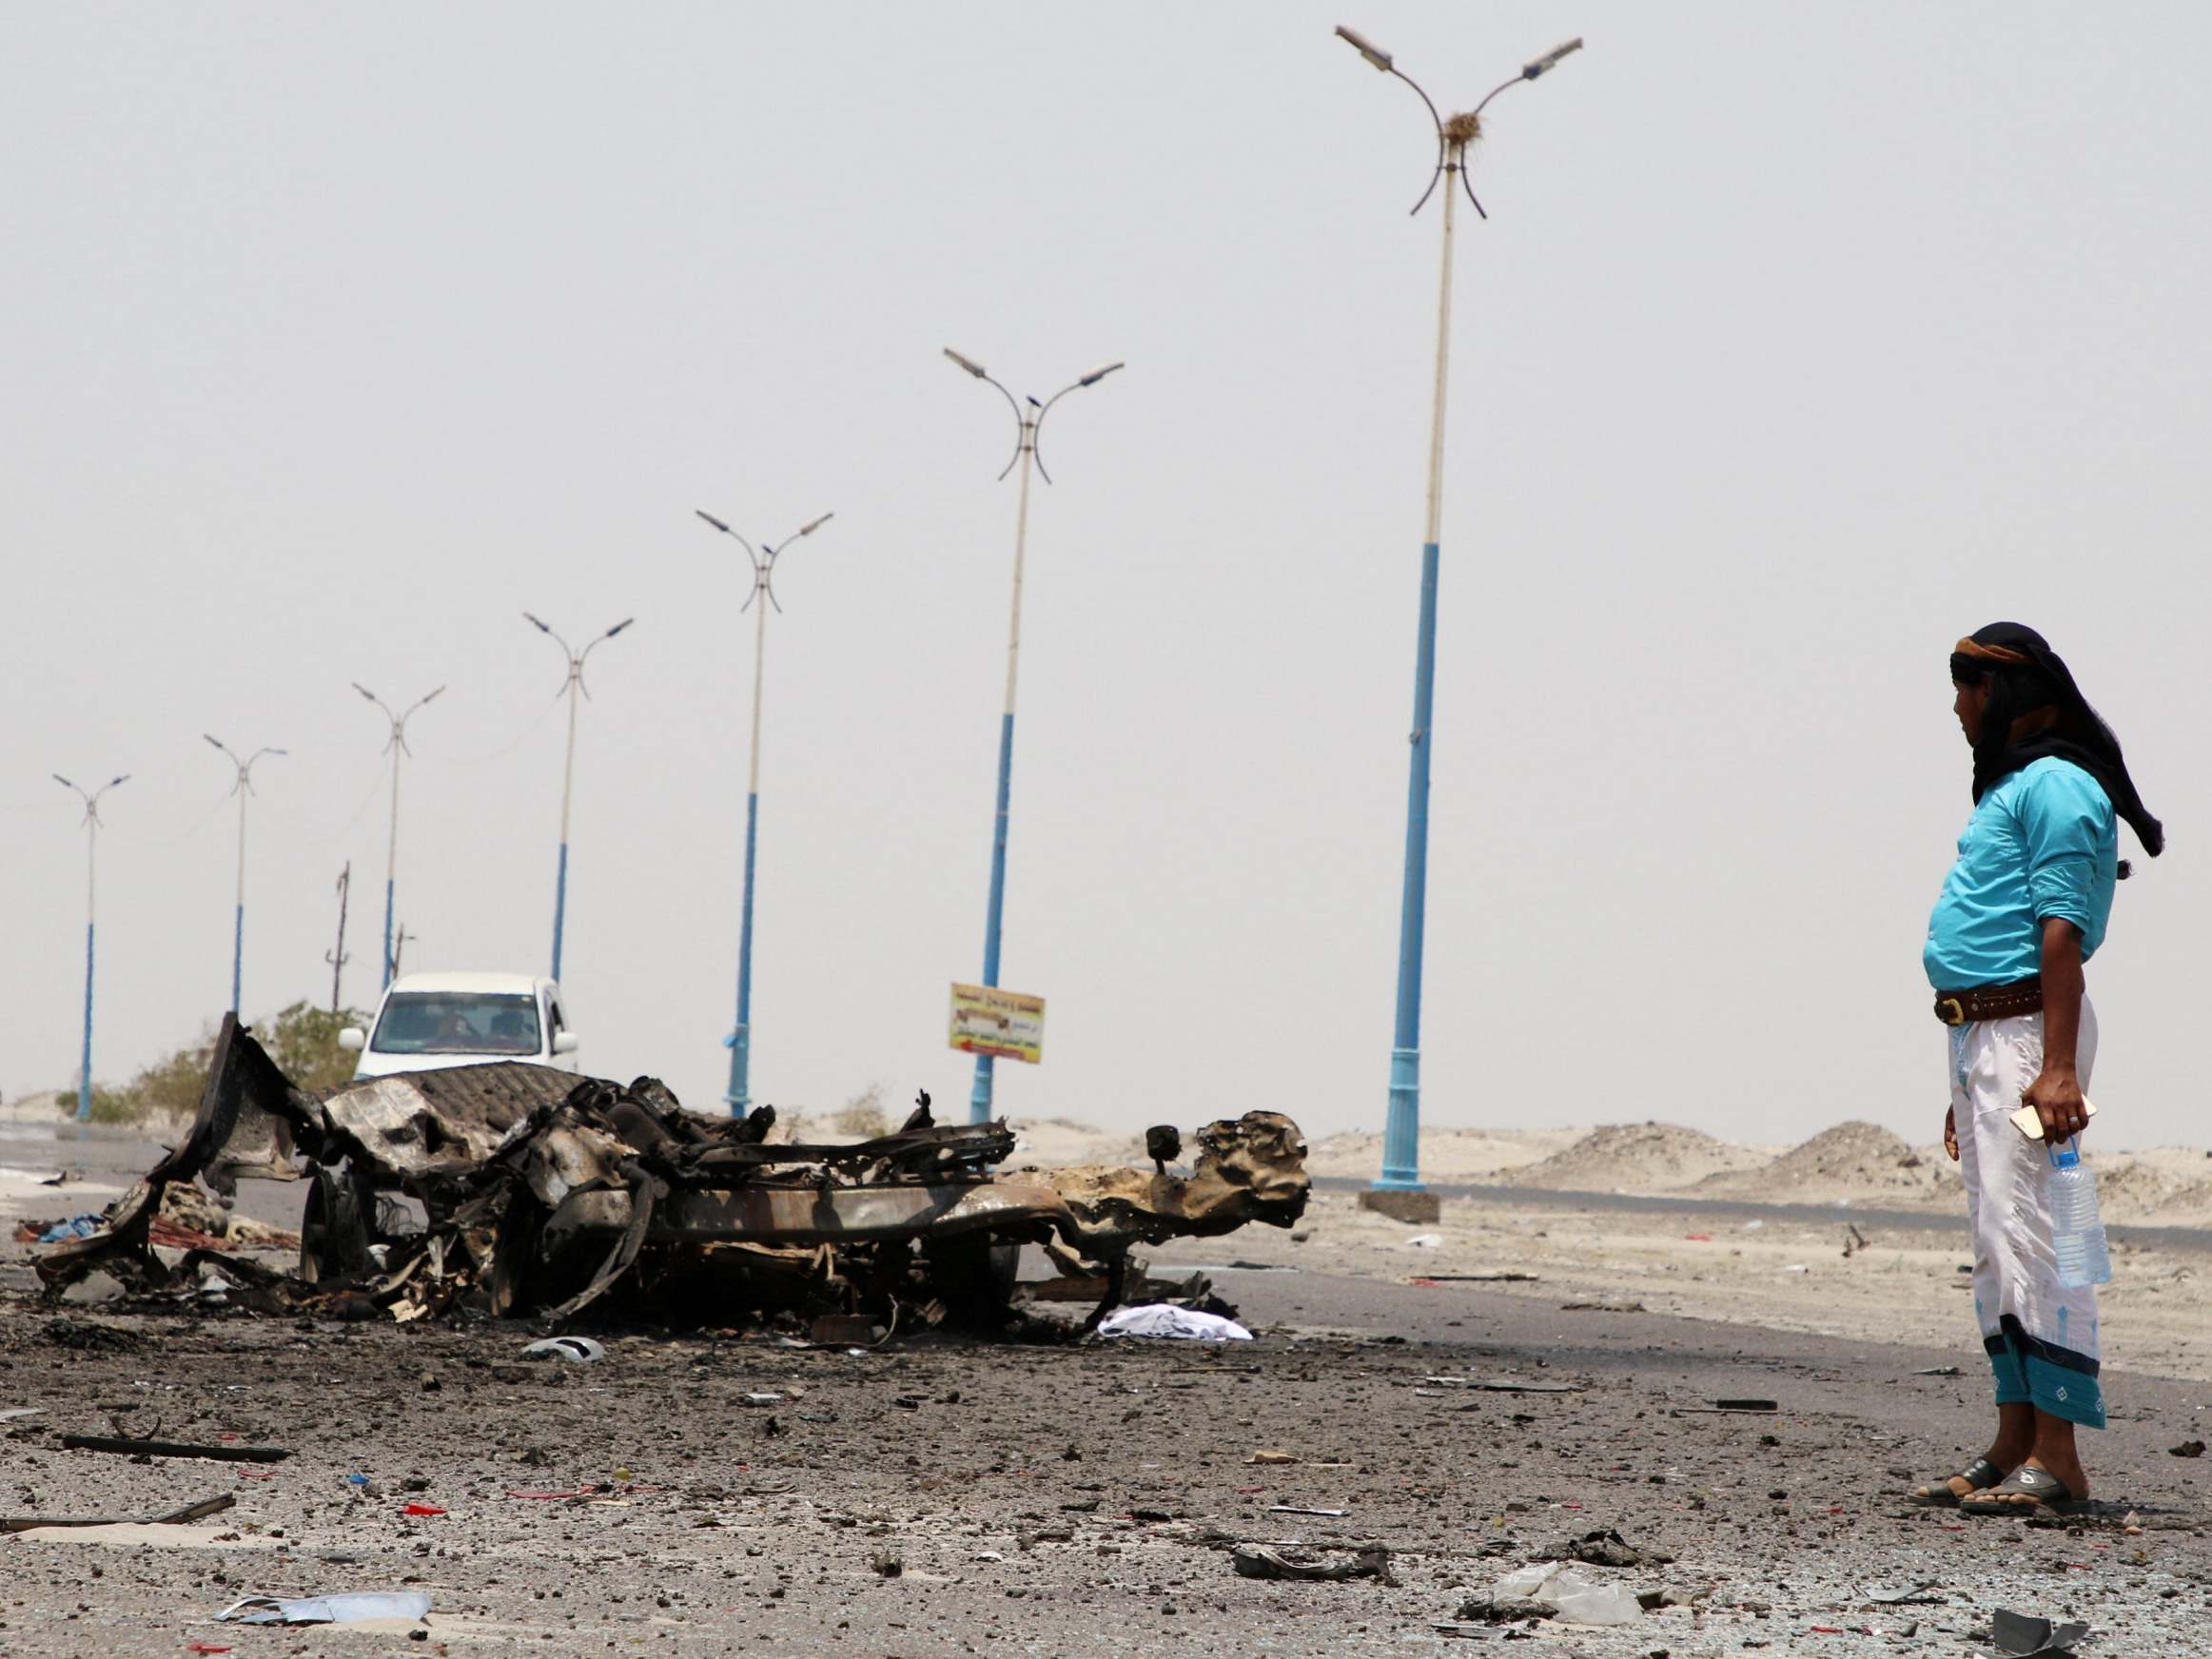 A man stands past the wreckage of government forces vehicles destroyed by UAE air strikes near Aden, Yemen, August 30, 2019